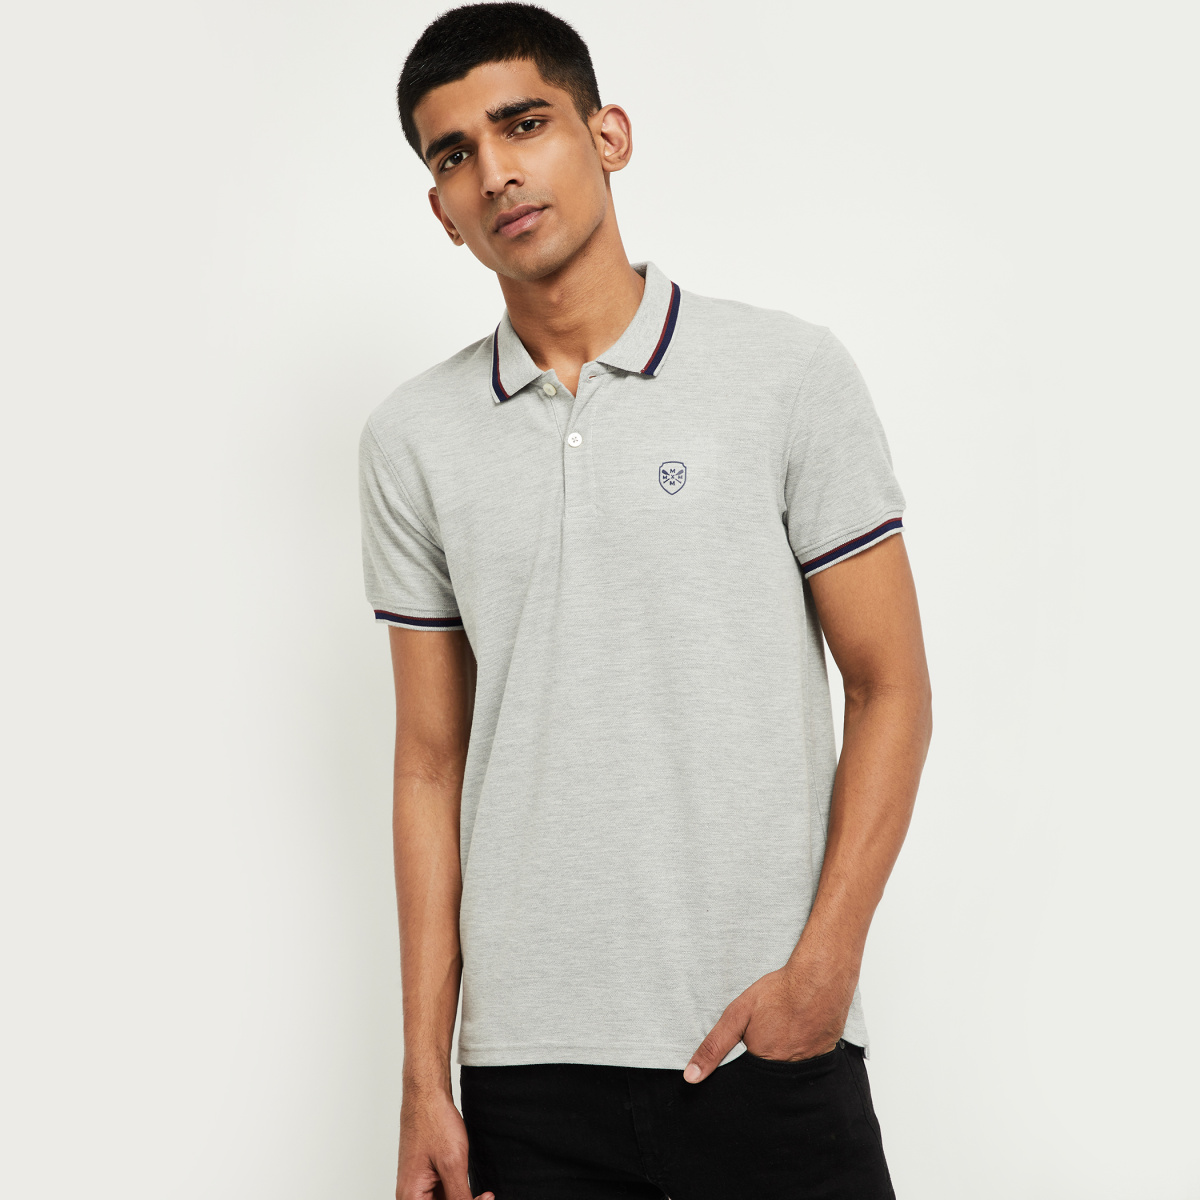 MAX Solid Slim Fit Polo T-shirt